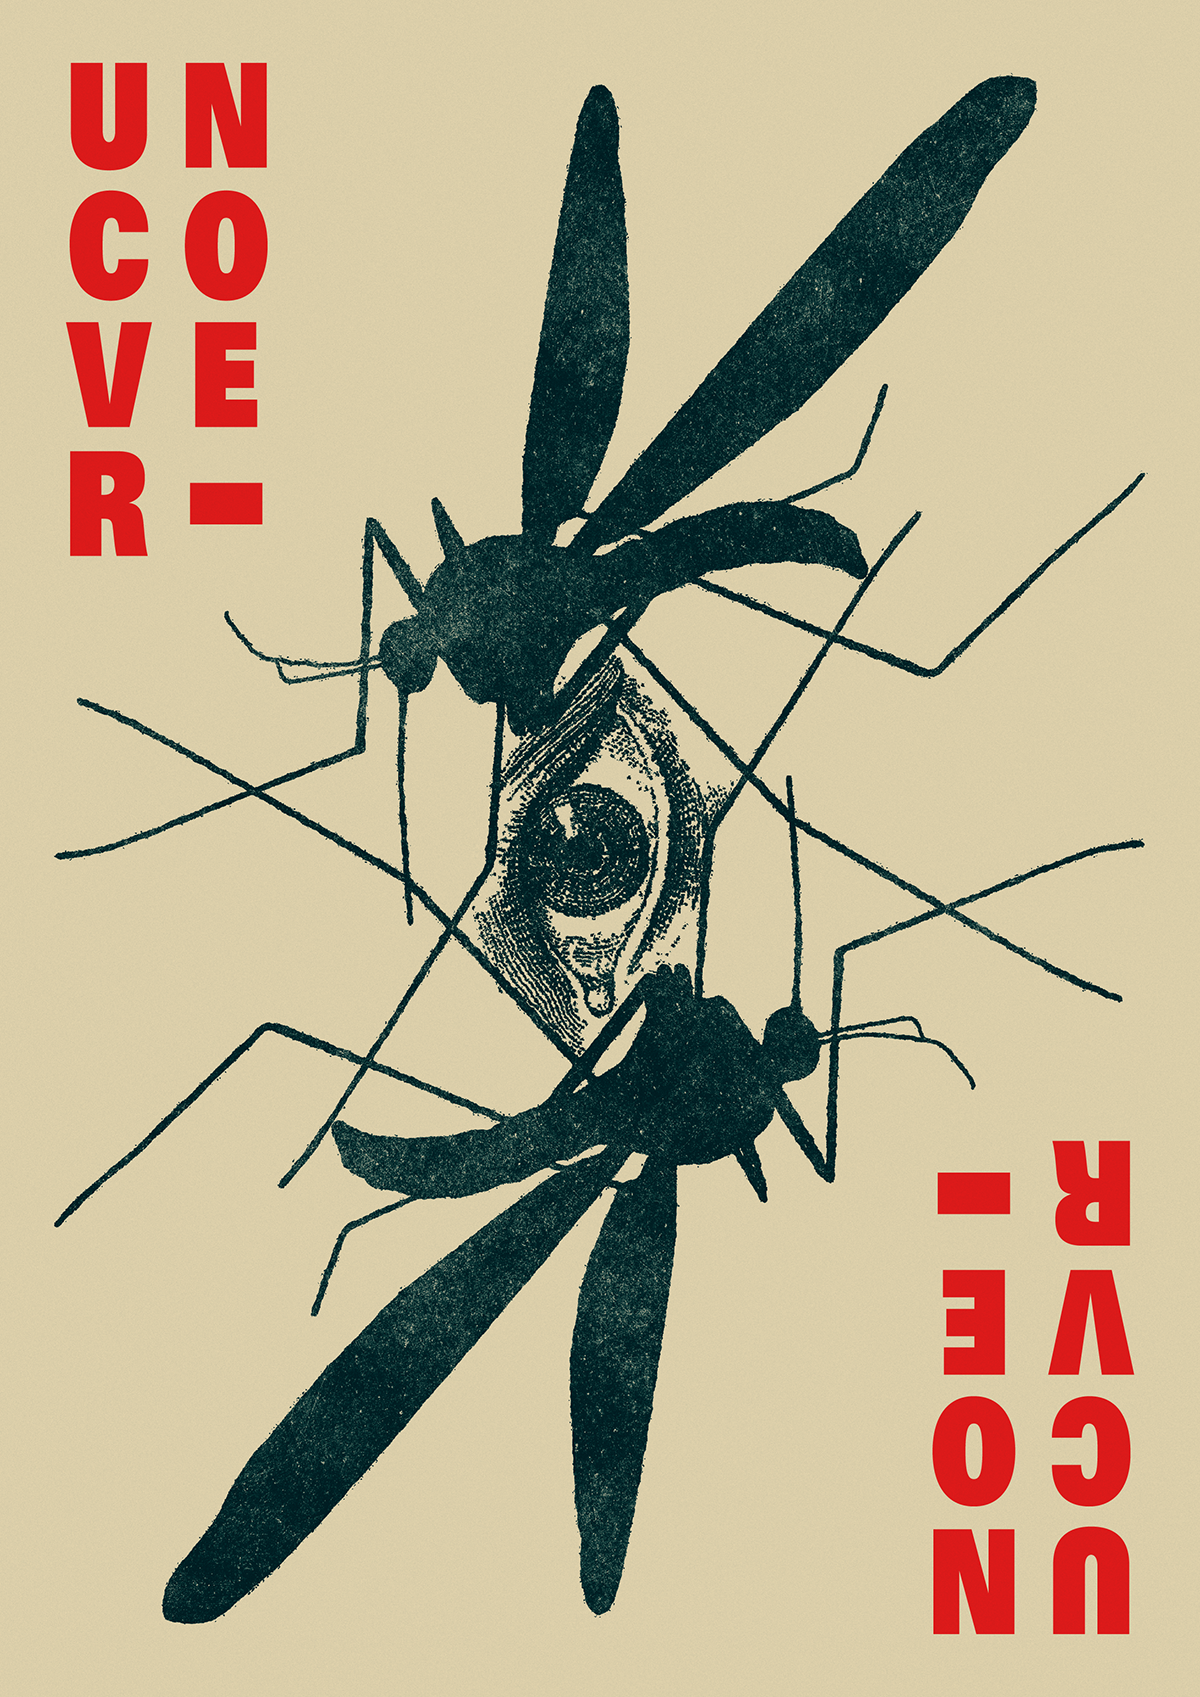 heyporter hey porter heyporterposter poster Uncover mosquito eye ILLUSTRATION  insect